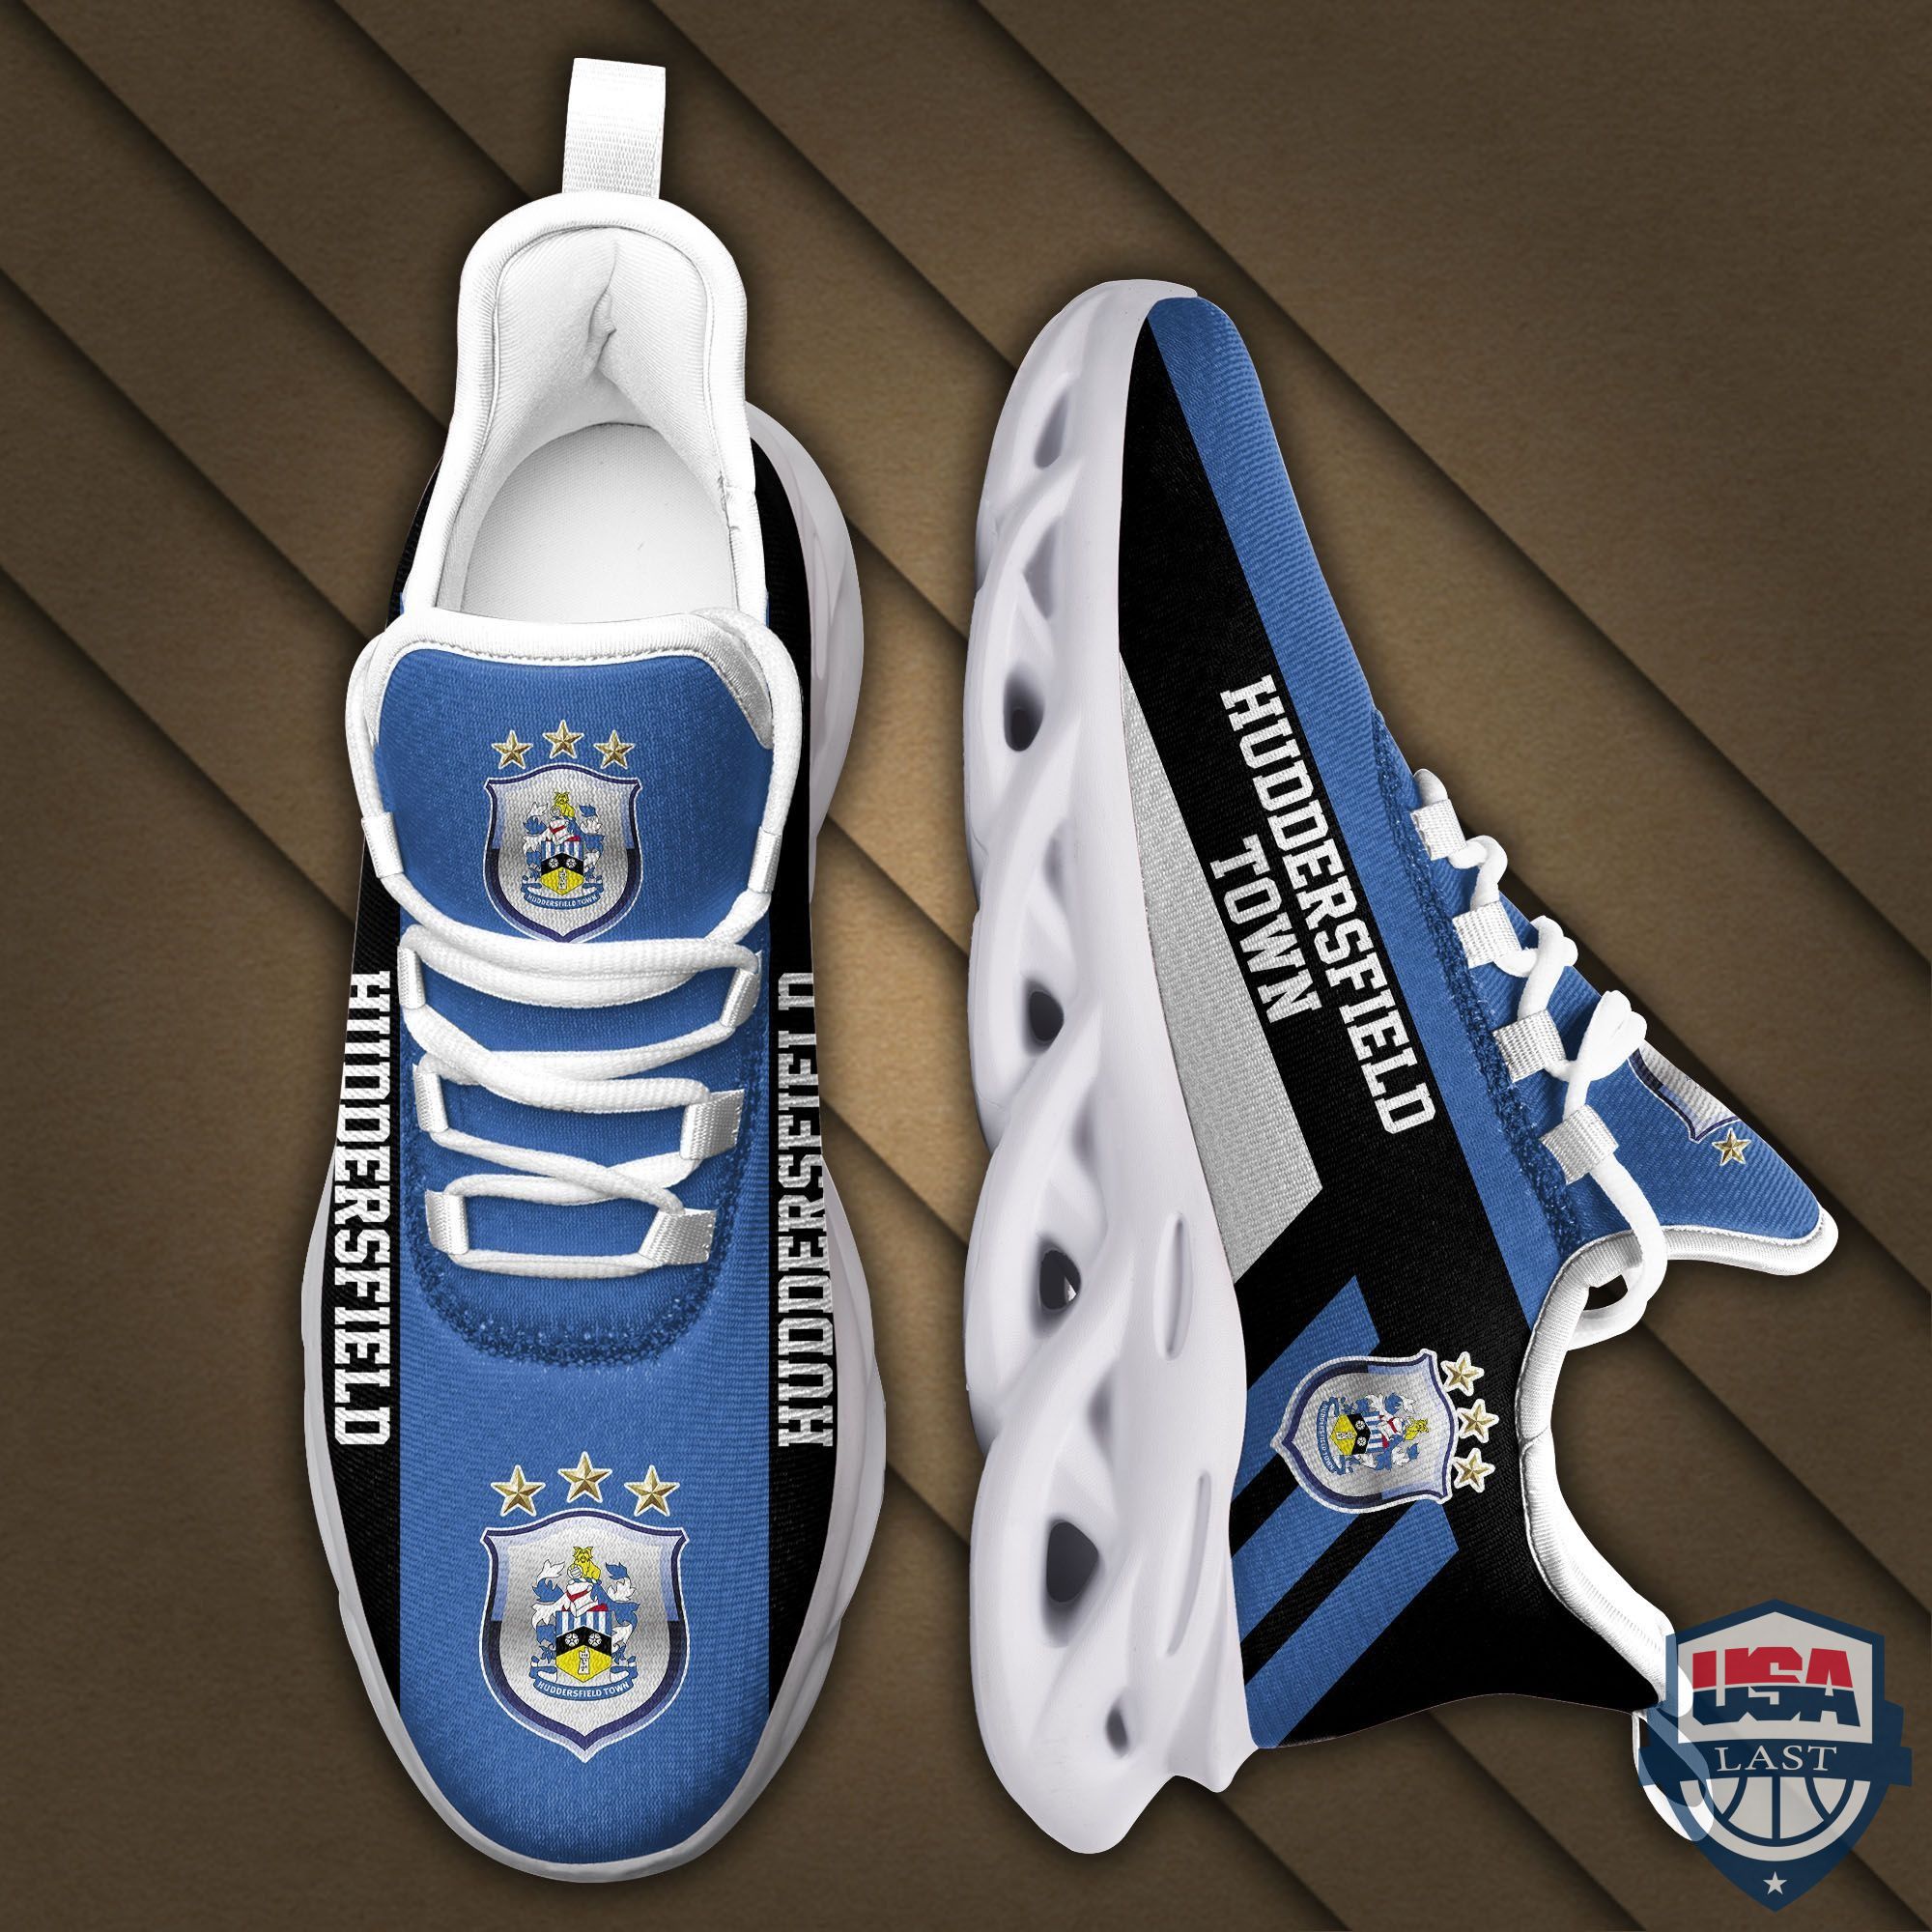 Huddersfield Town AFC Max Soul Sneakers Running Sports Shoes